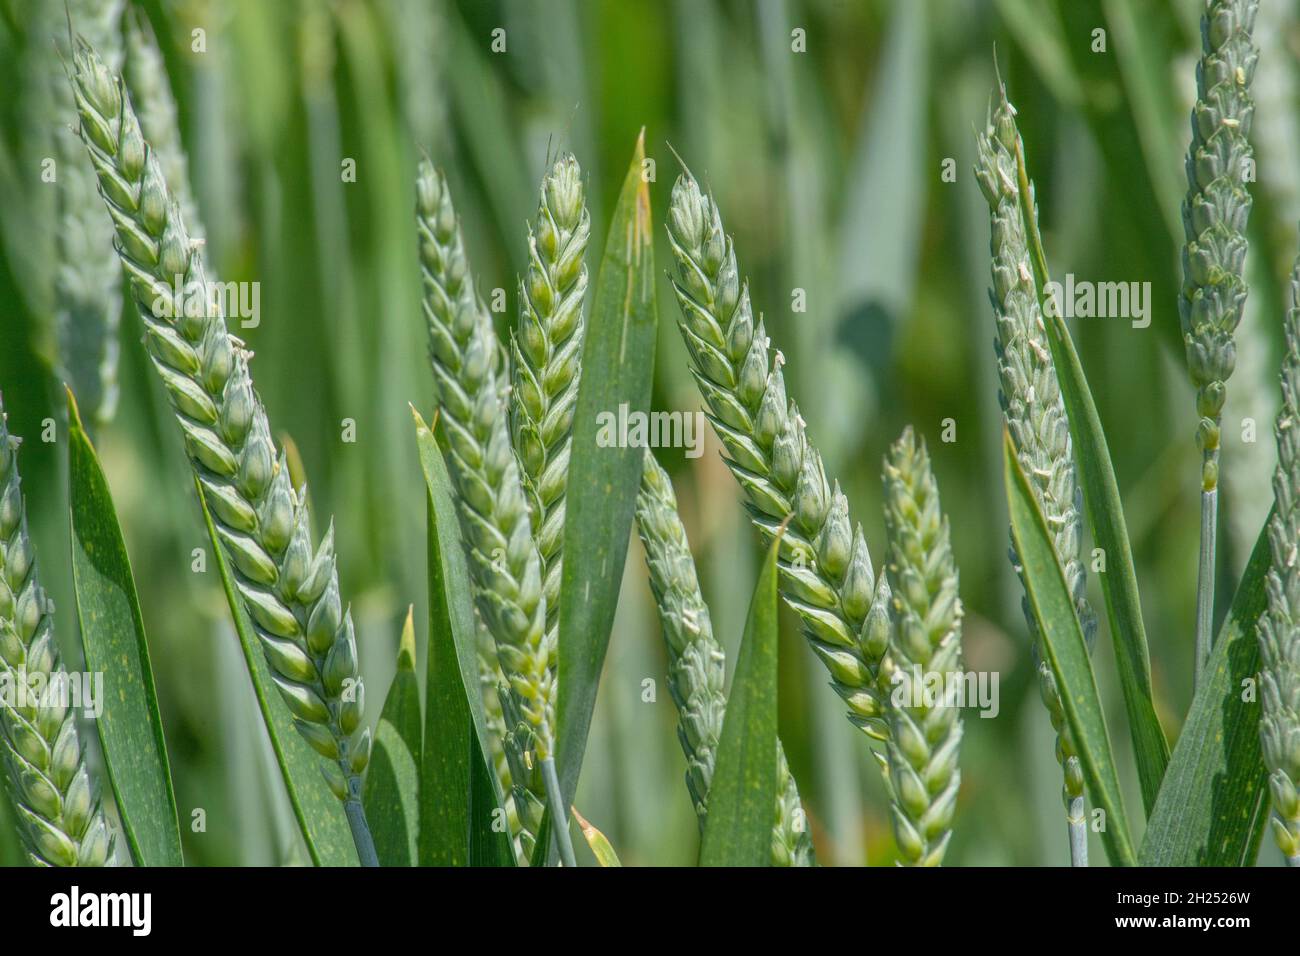 Heads of Wheat / Triticum aestivum still in their unripe green state. For concept of famine or abundance. Also for food security / growing food. Stock Photo